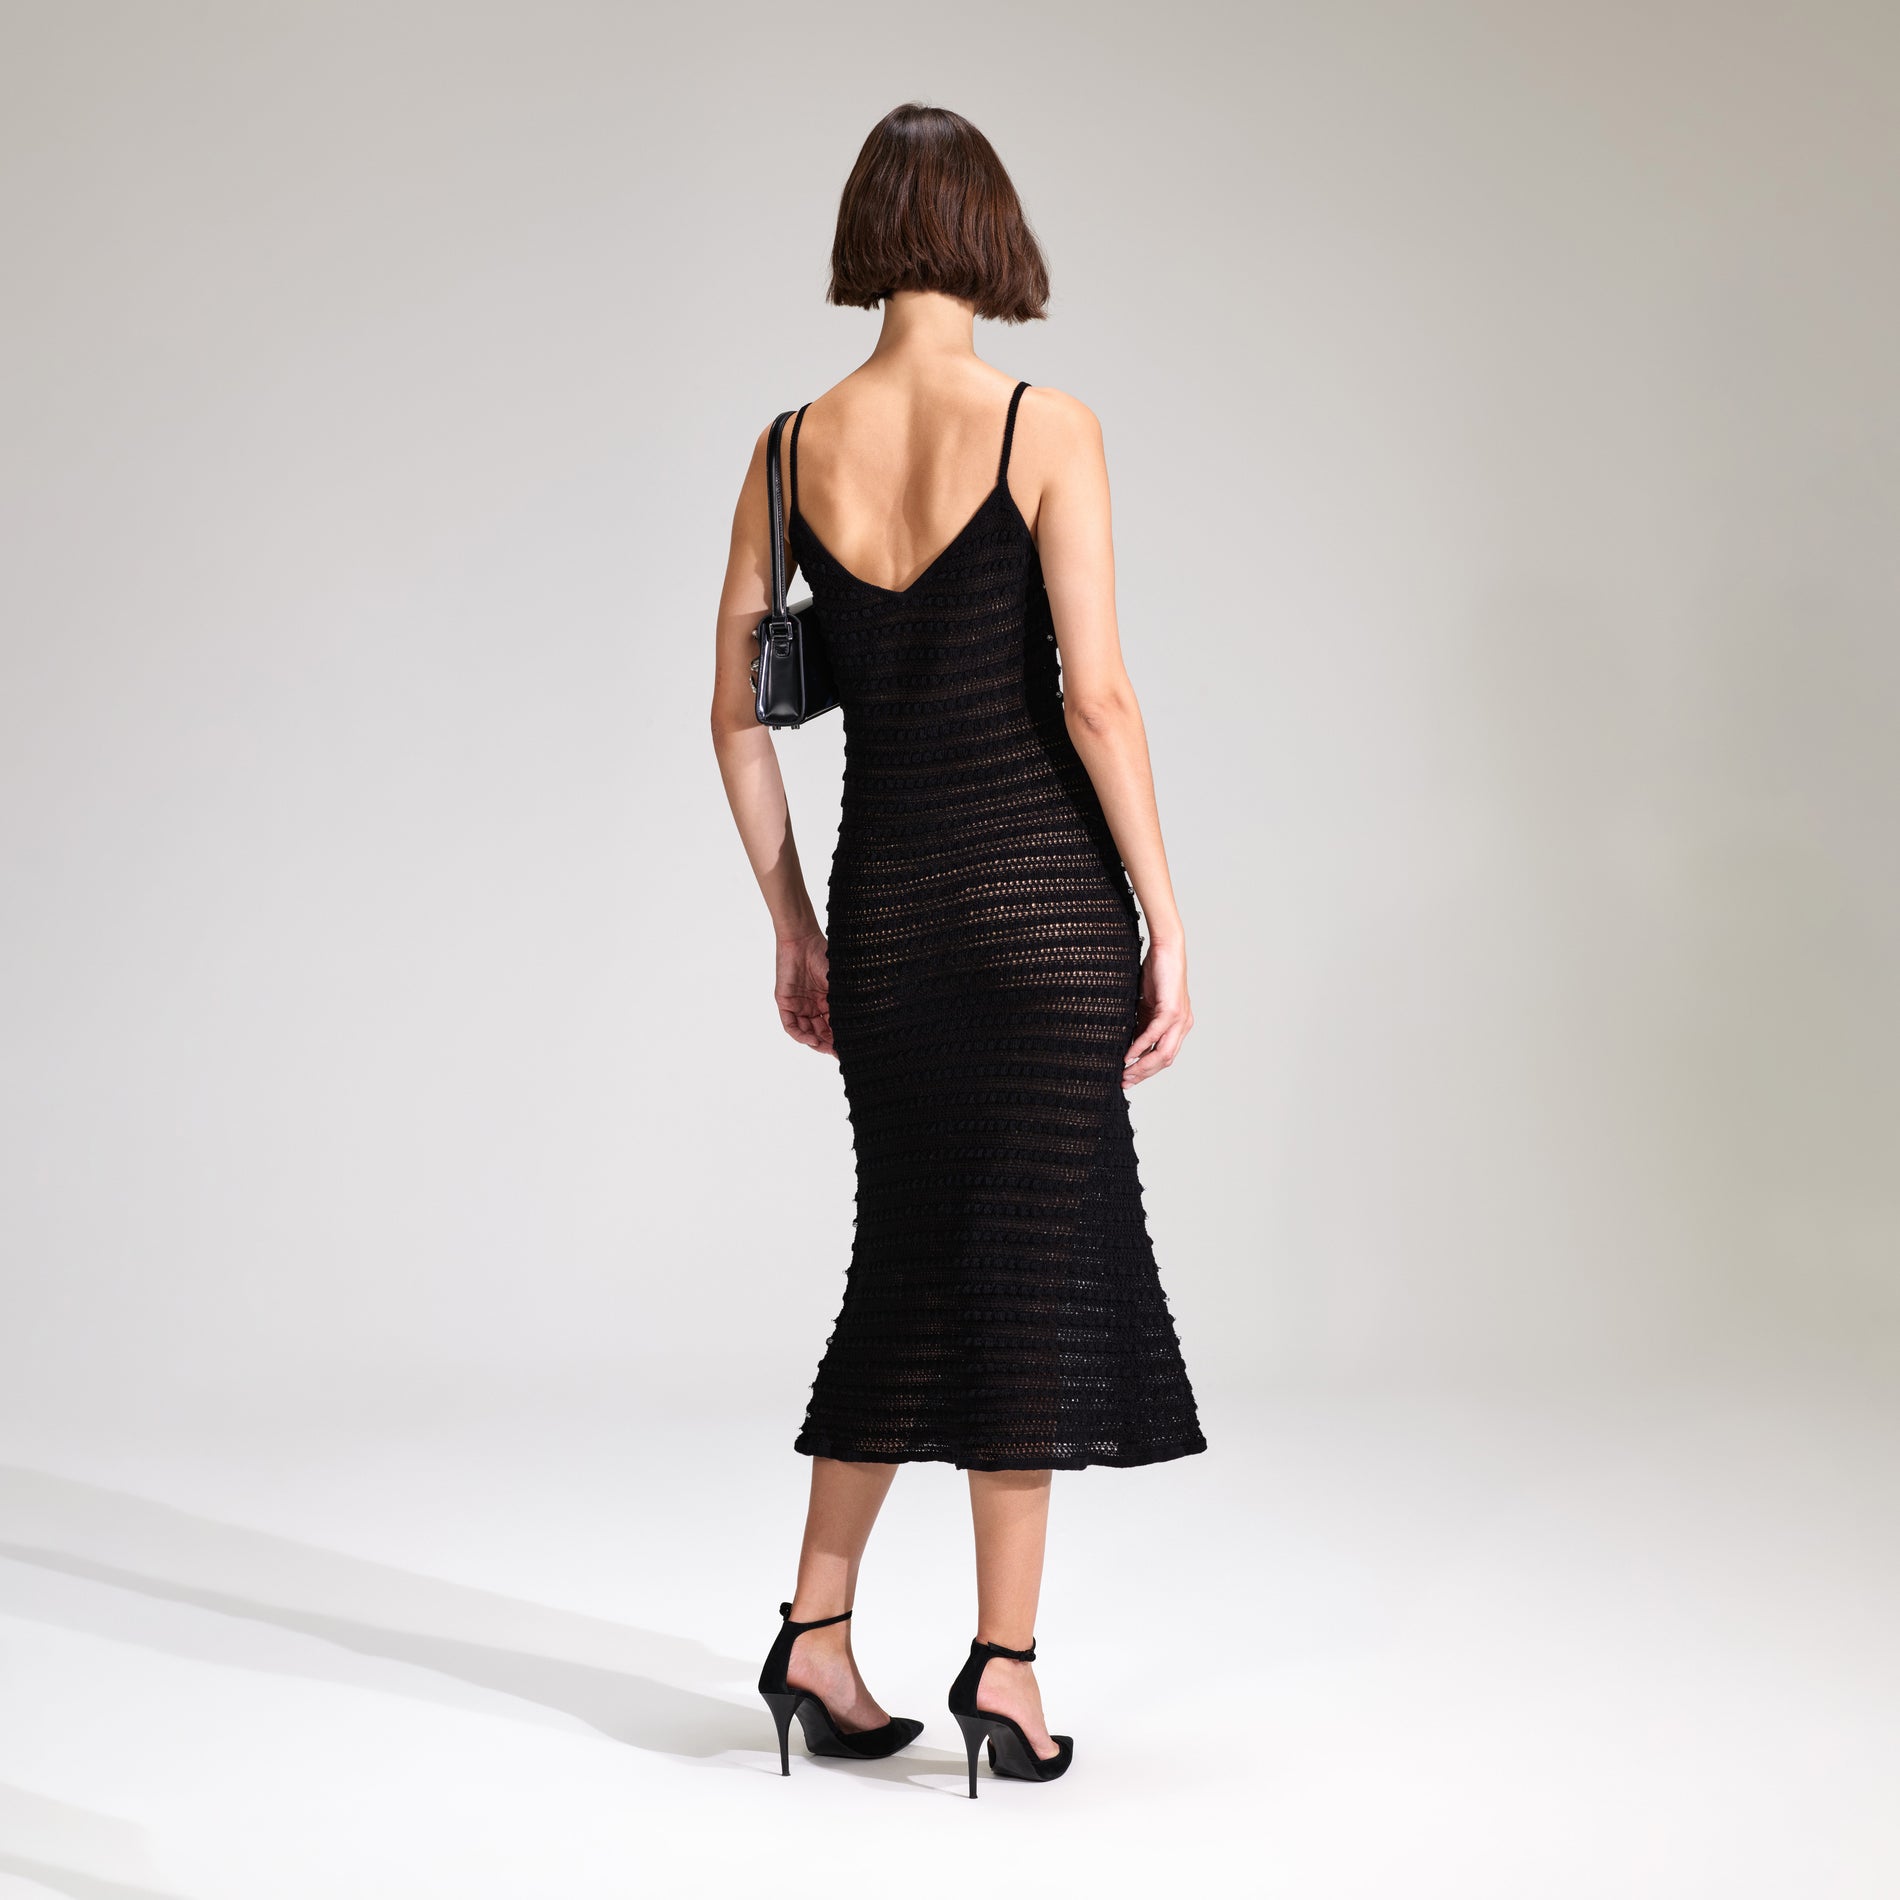 A woman wearing the Black Beaded Strappy Knit Midi Dress